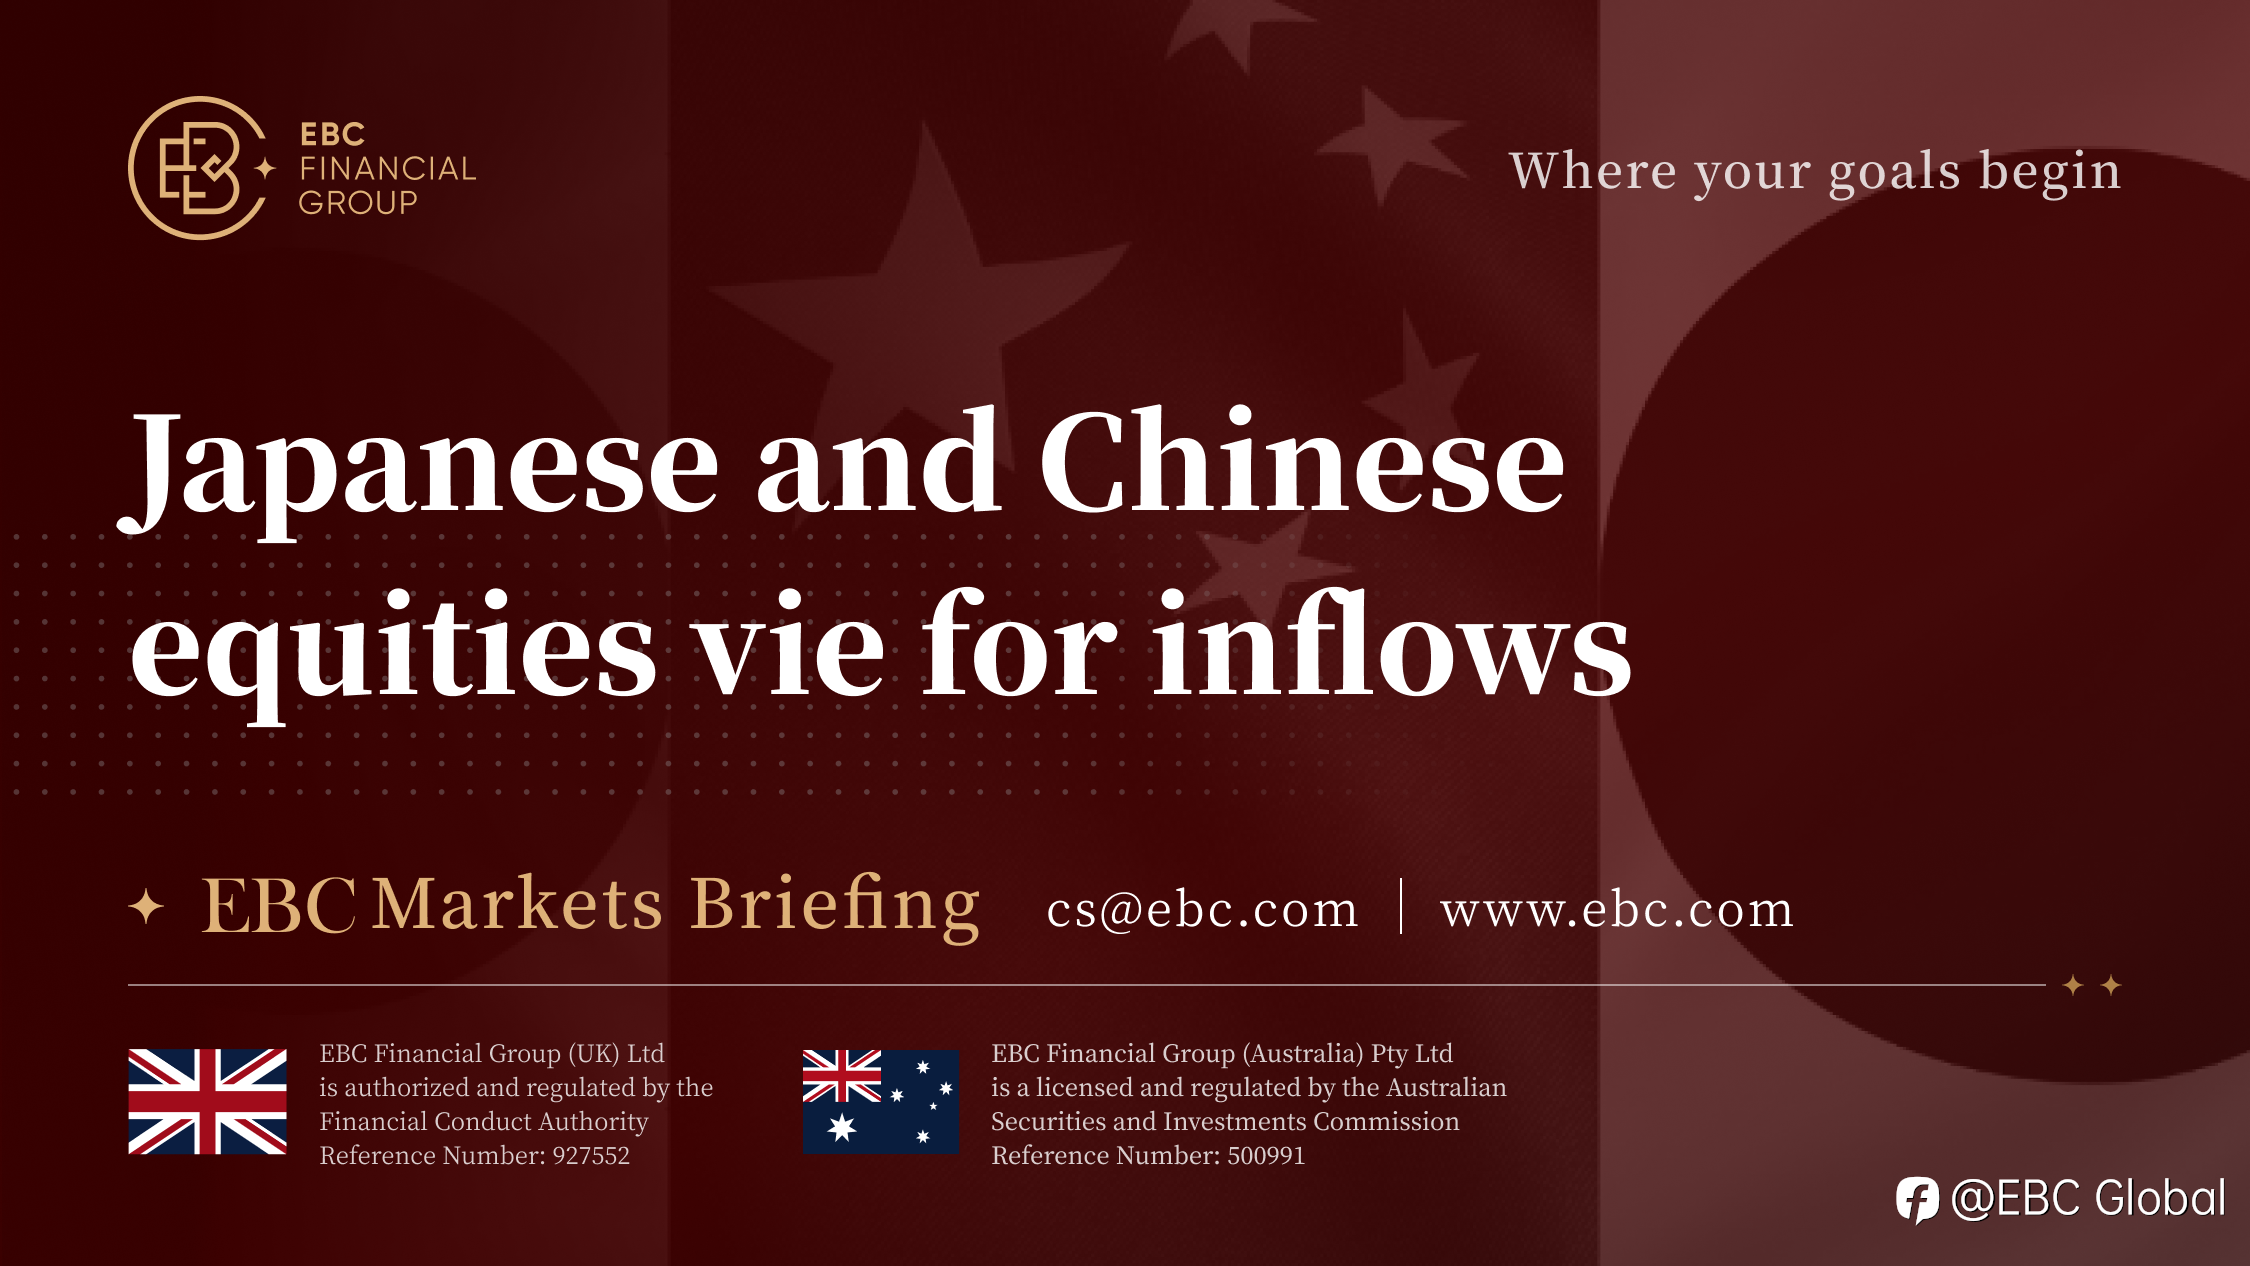 EBC Markets Briefing | Japanese and Chinese equities vie for inflows